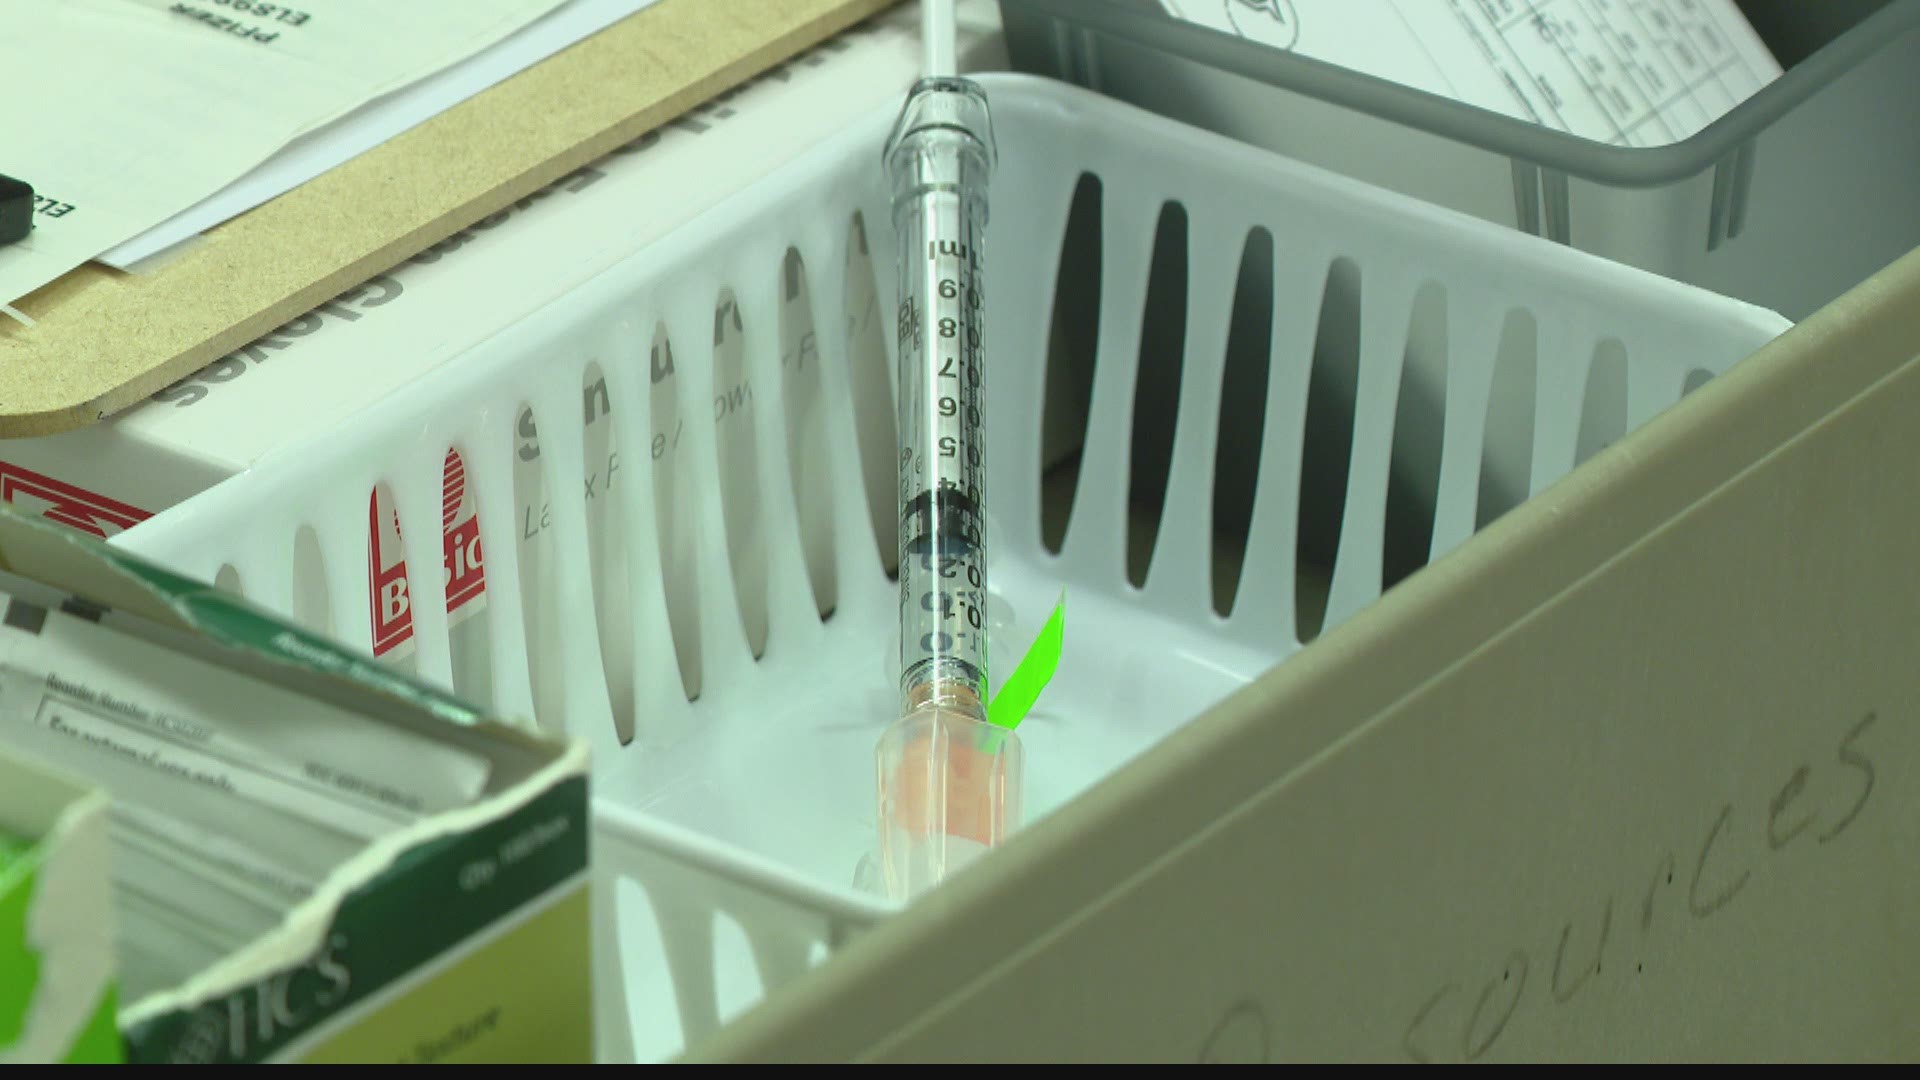 One Johnson County vaccination clinic got more vaccine than they expected when they told the state they were running out.